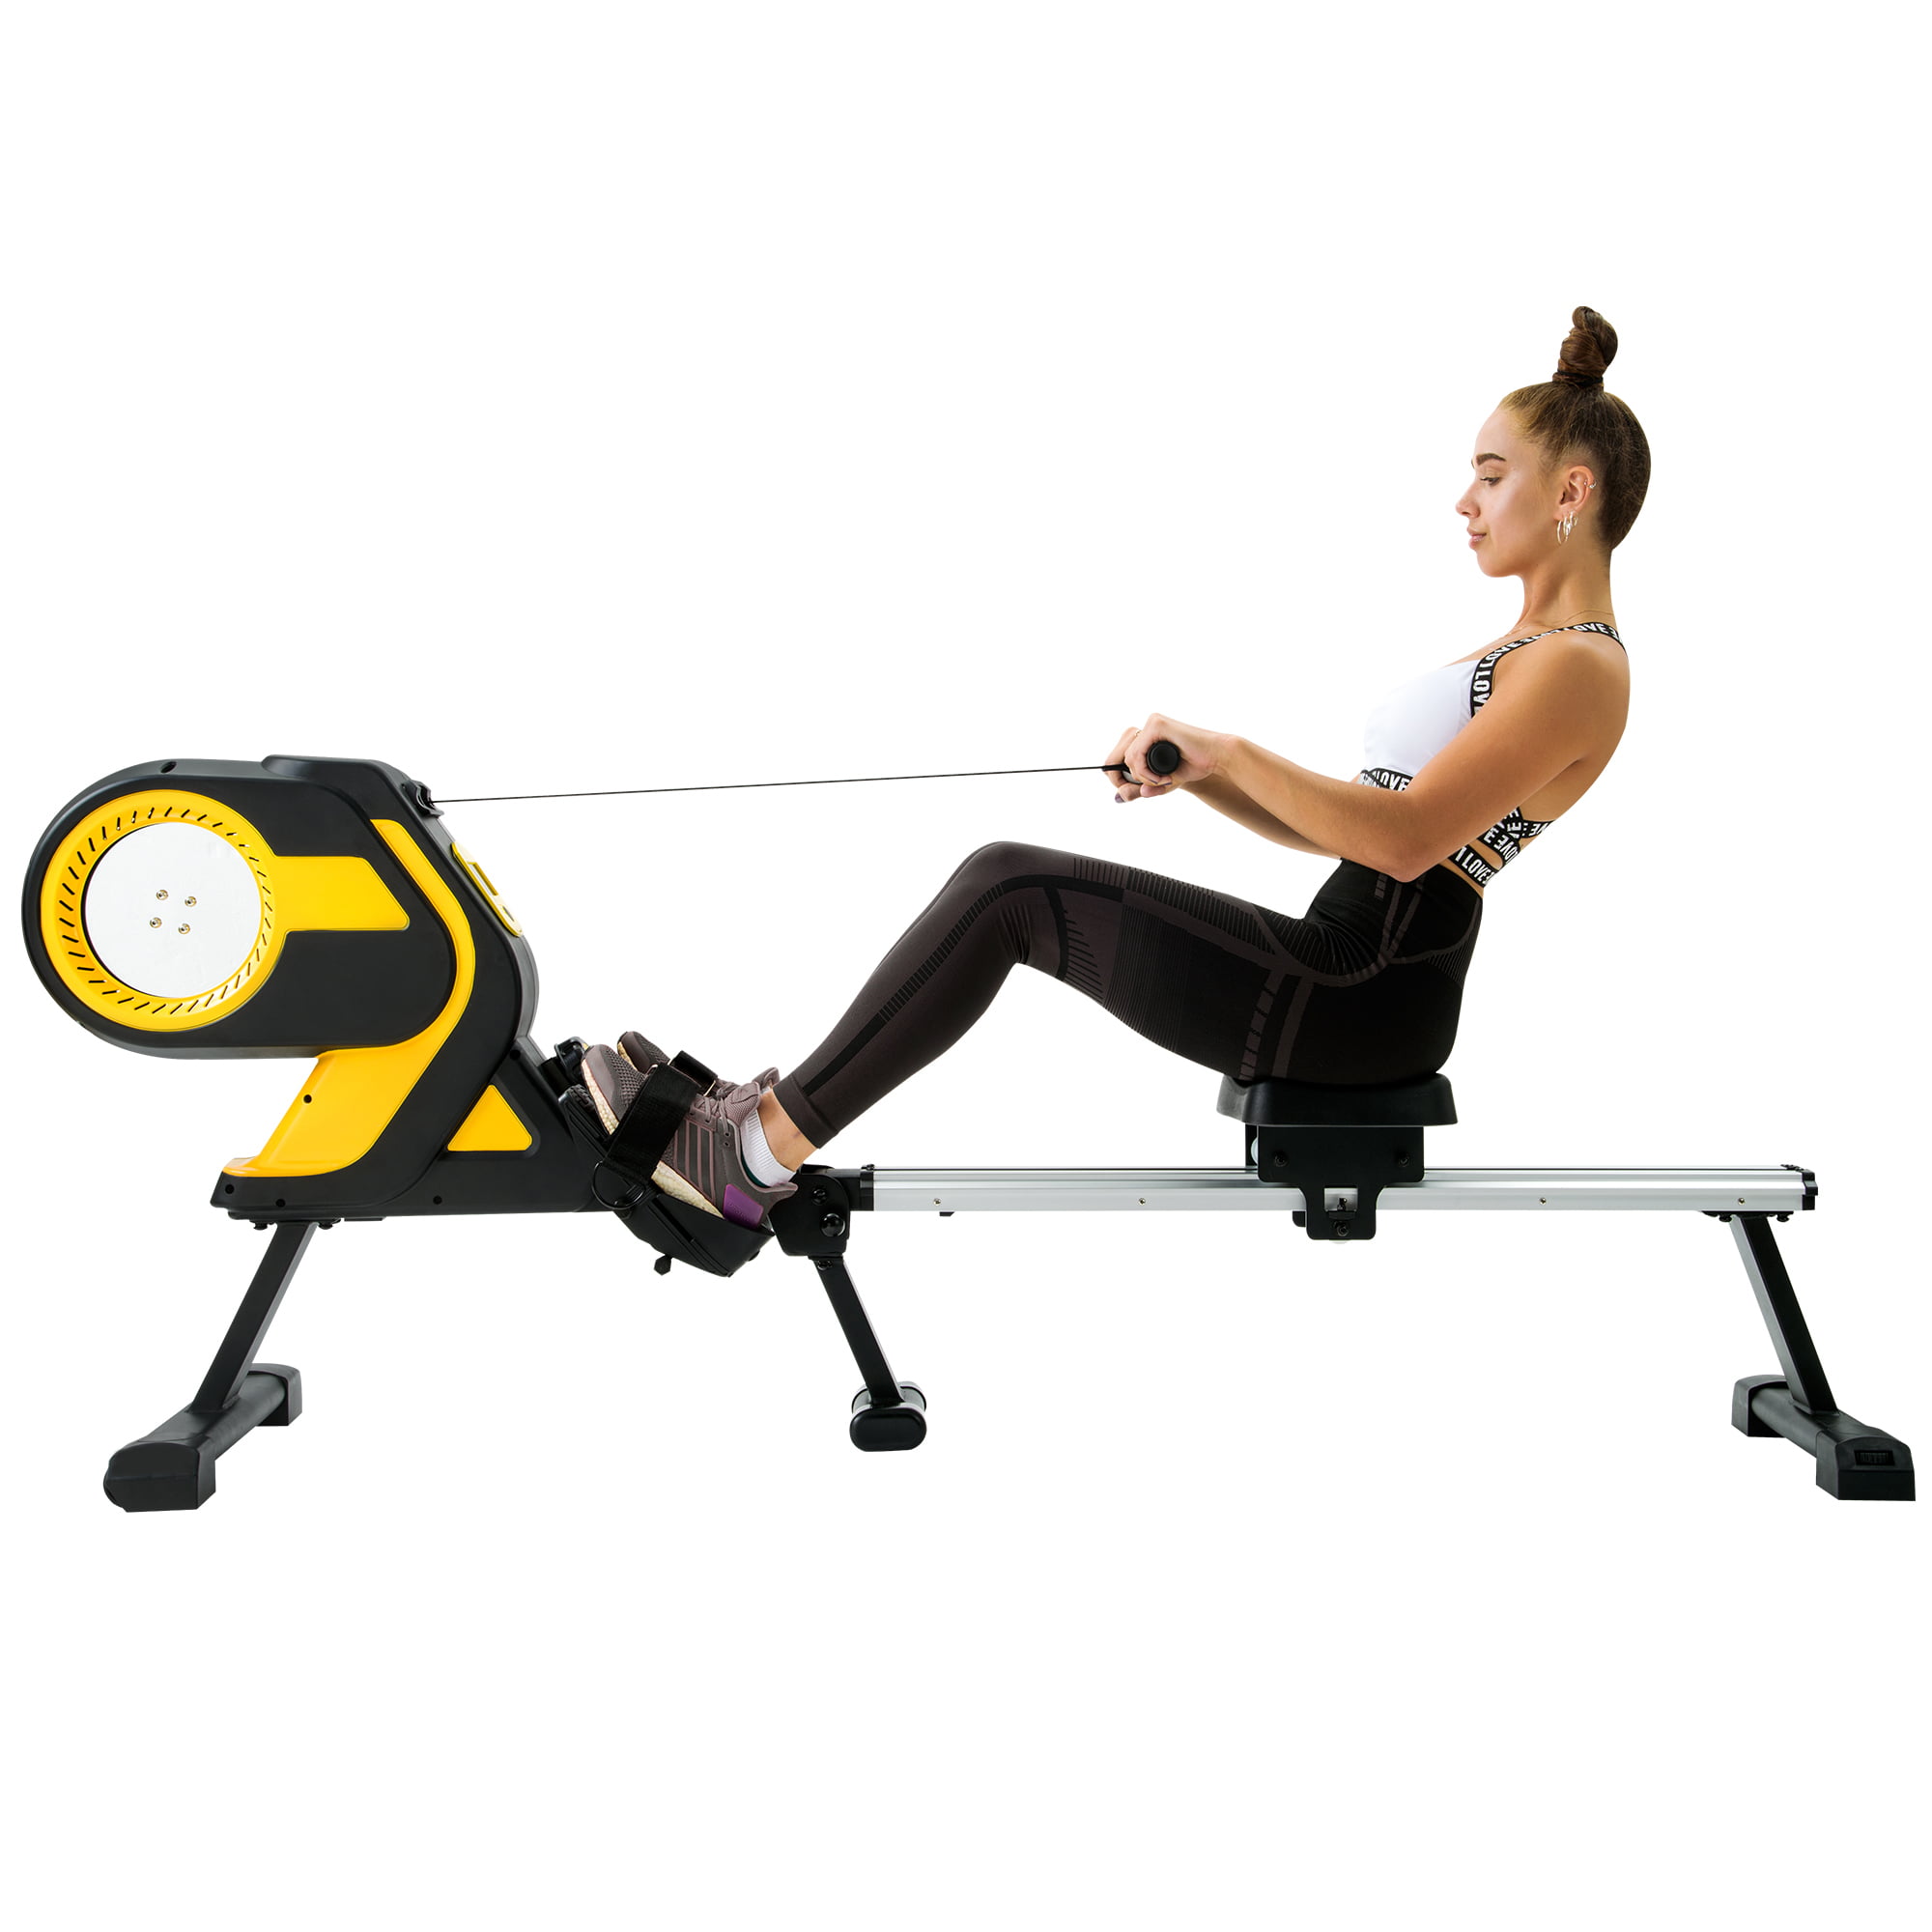 Details about   Metal Water Rowing Machine Rower Cardio Fitness Exercise Home Gym w/ LCD Monitor 